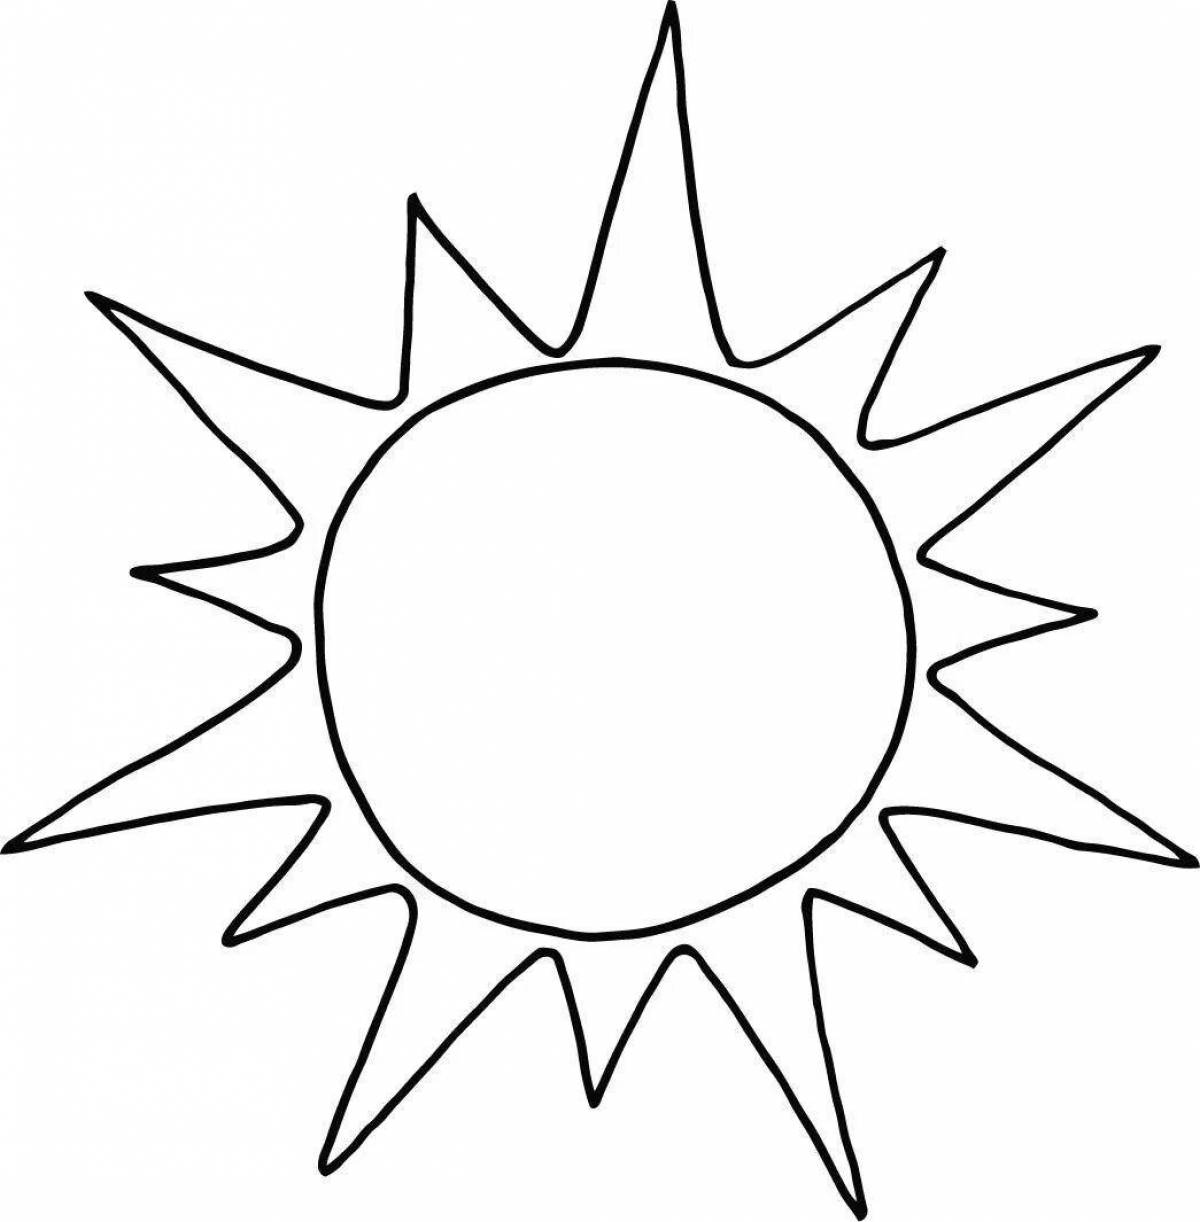 Glowing sun pattern coloring page